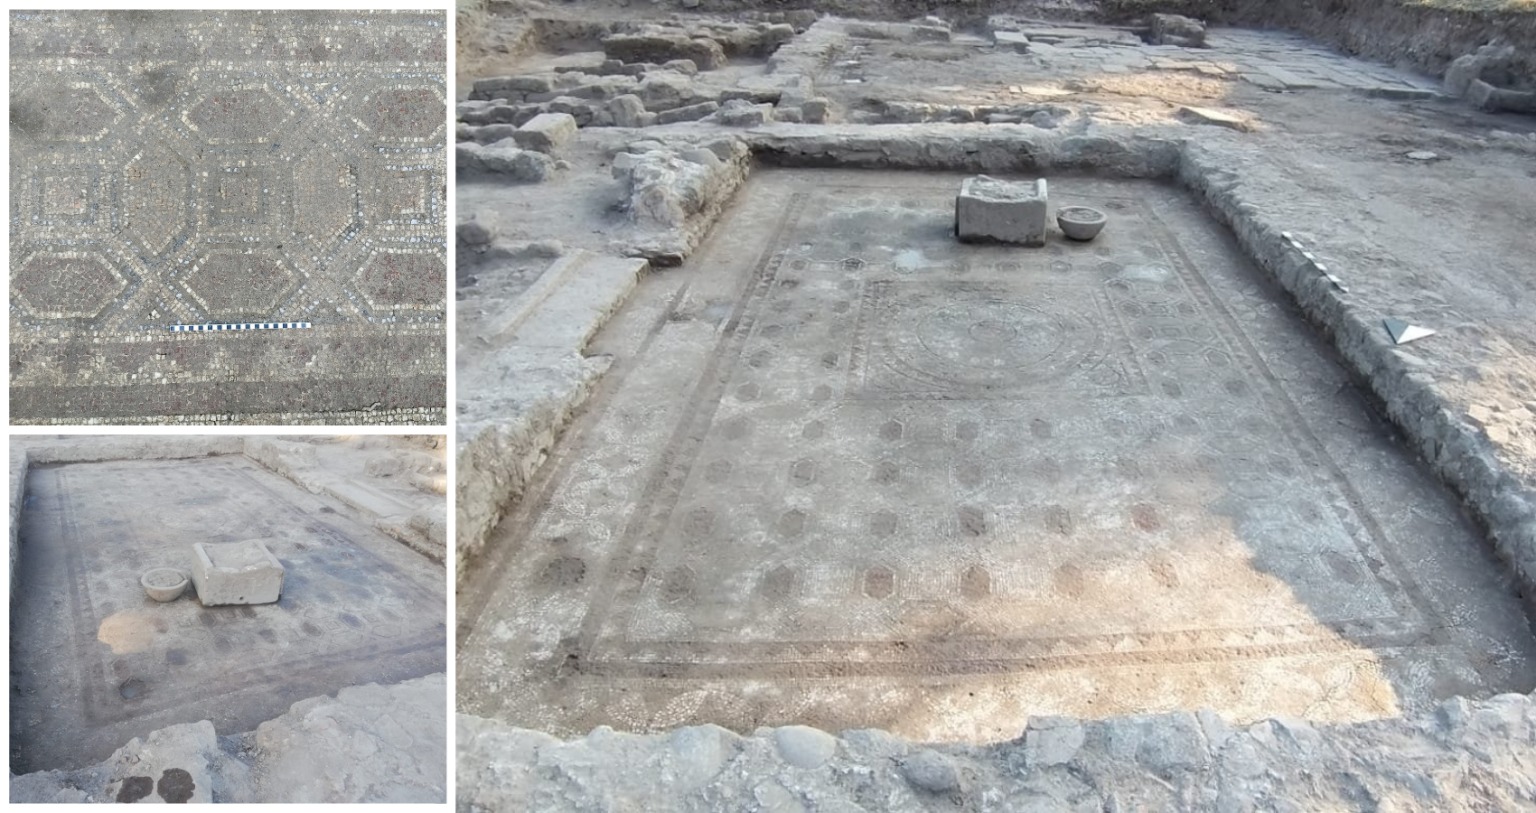 1,800-year-old geometric patterned mosaic found in Turkey’s Pergamon